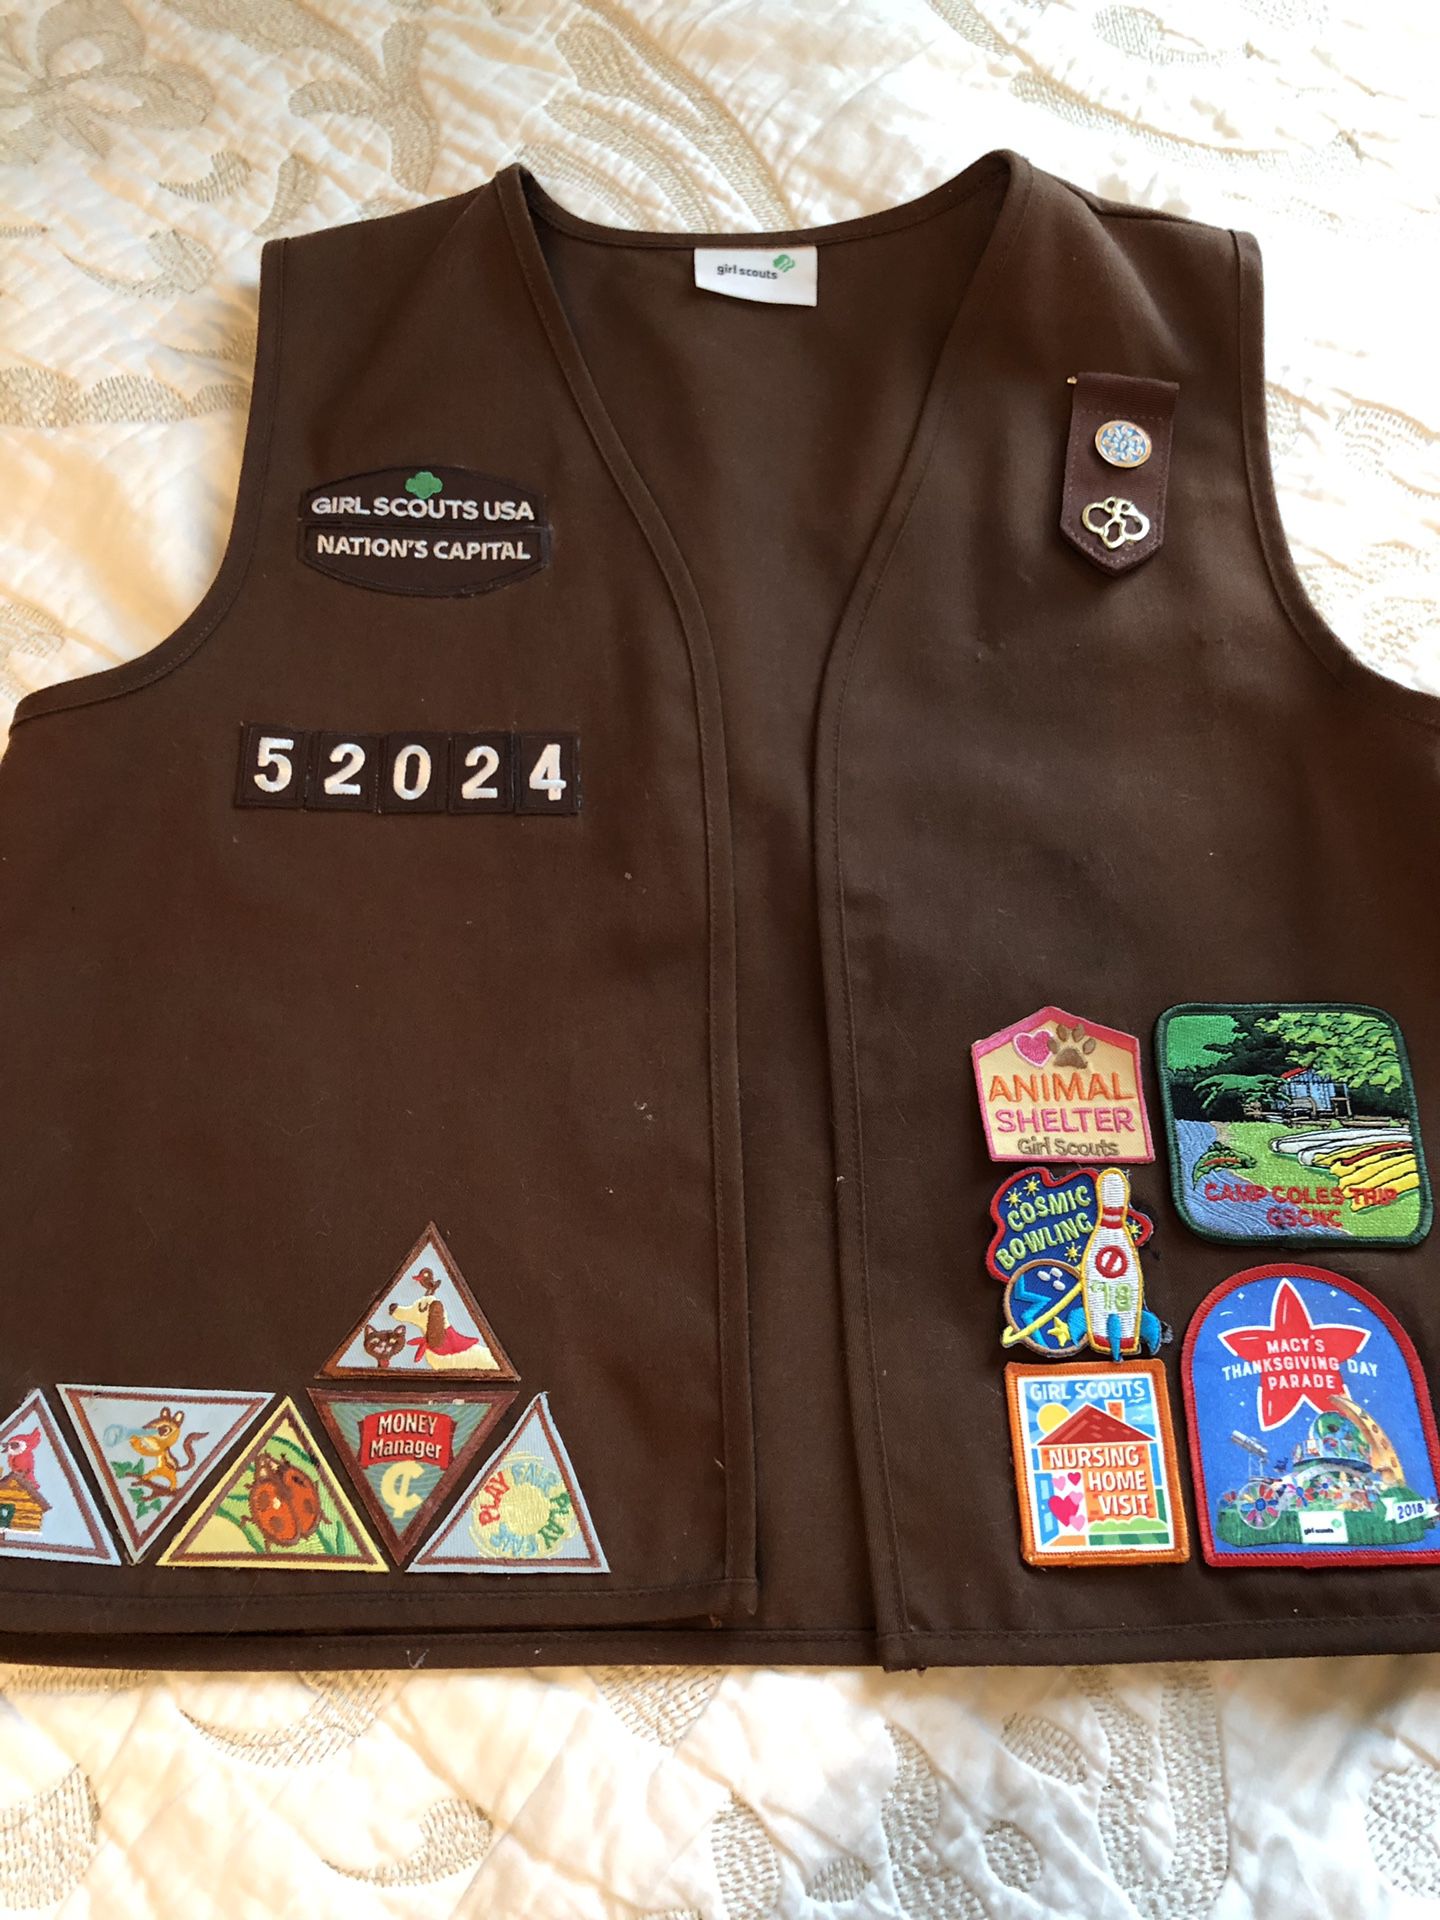 Girls scouts vest brownie